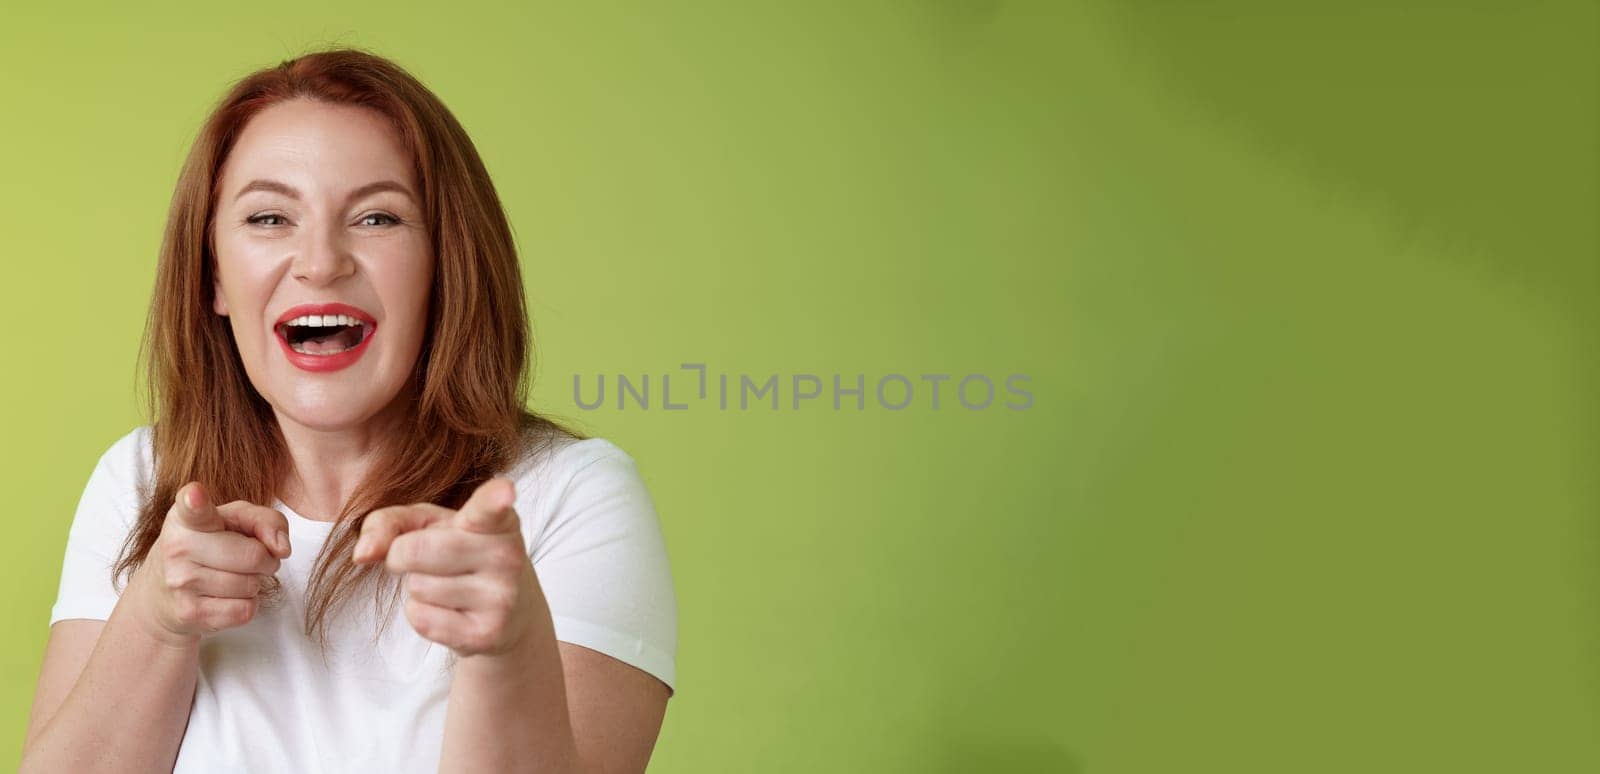 You did best. Friendly joyful enthusiastic redhead ginger middle-aged female pointing index fingers camera finger pistol gesture smiling broadly congratulate cheer coworker stand green background.